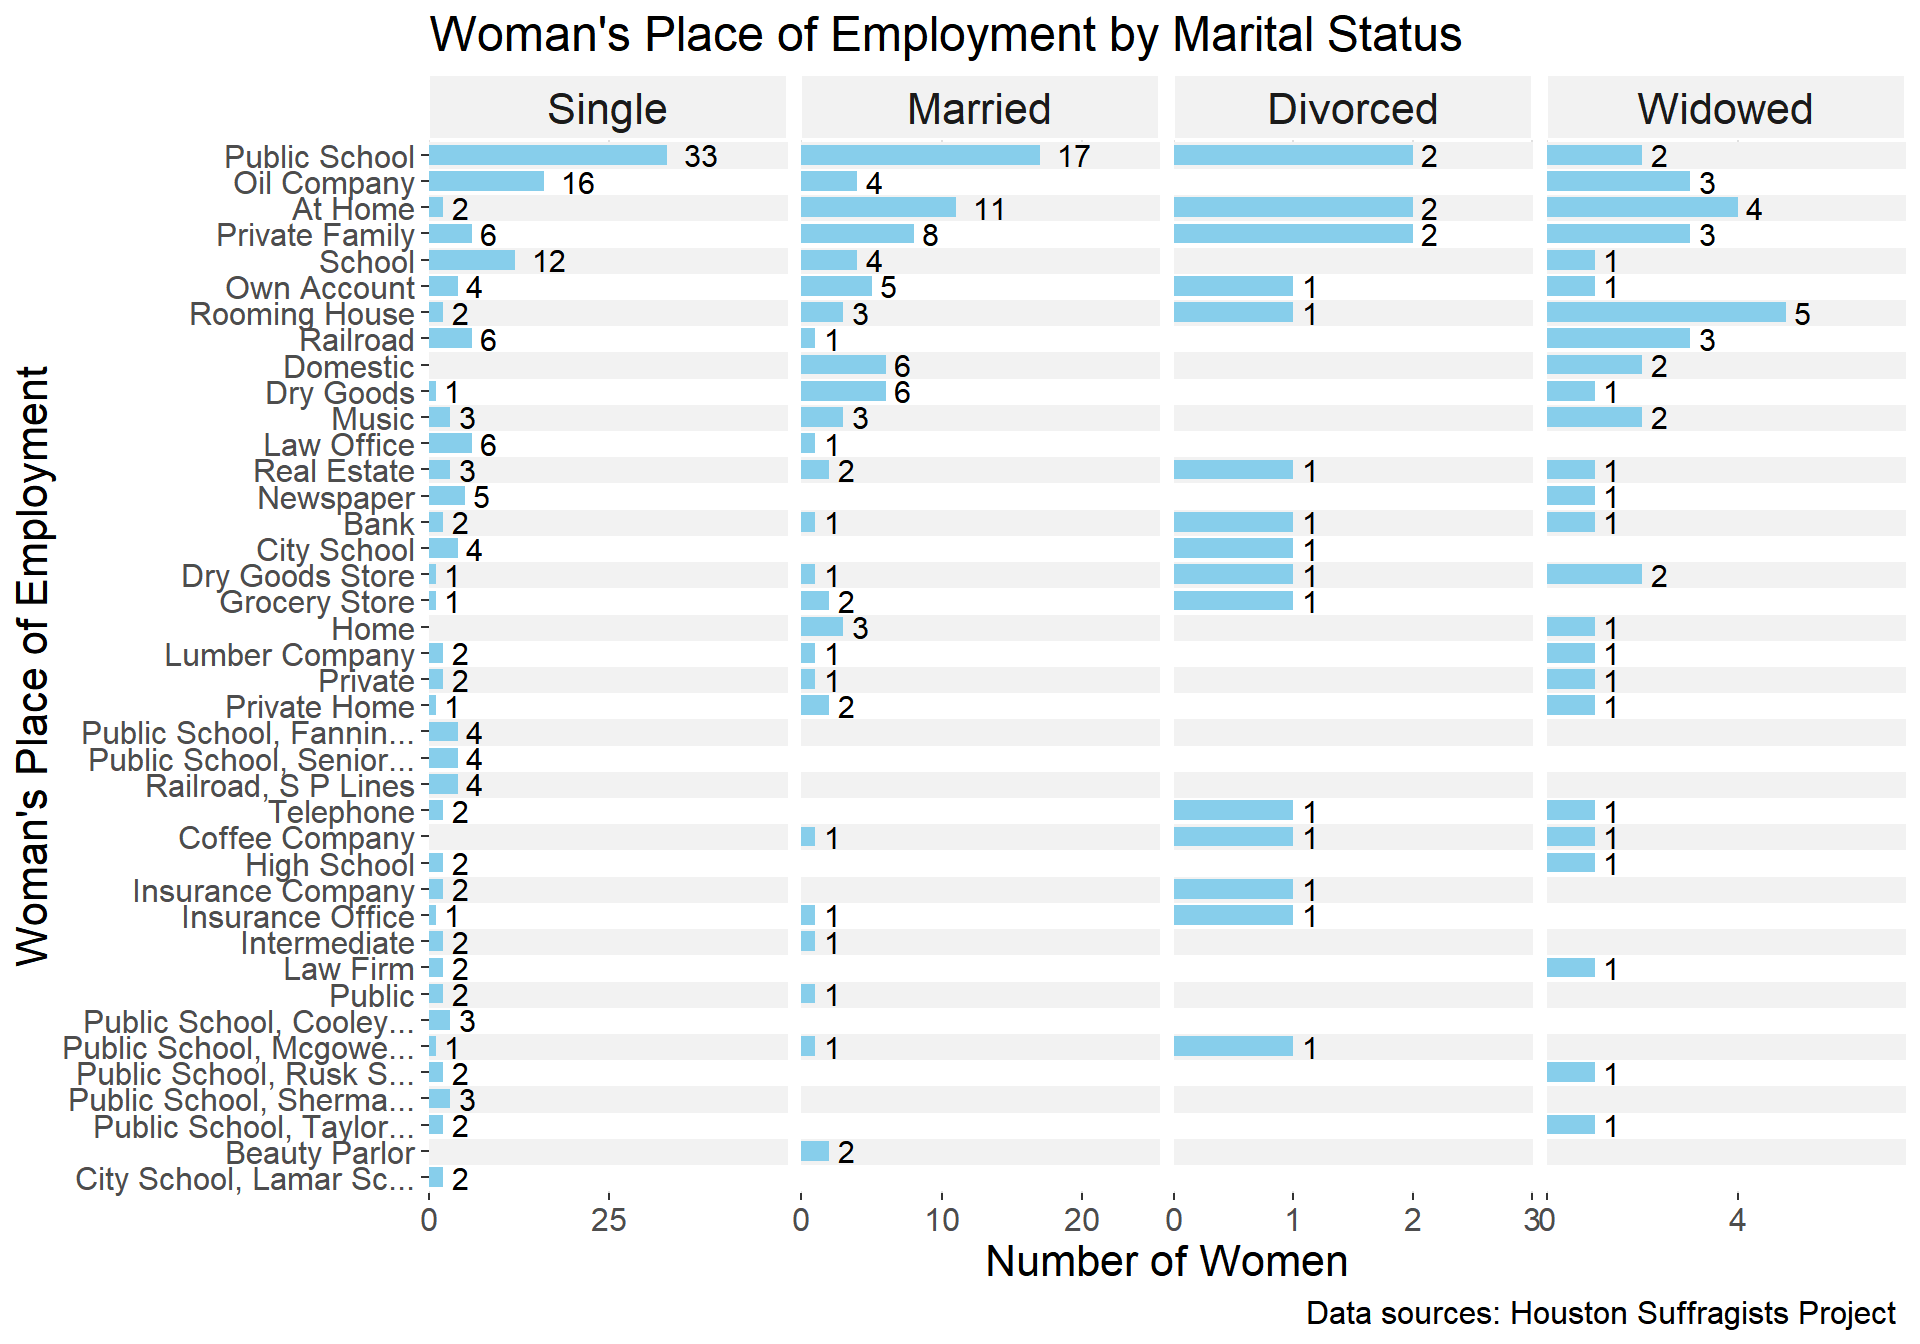 Chart 3  - Women's Trade or Profession by Place of Employment